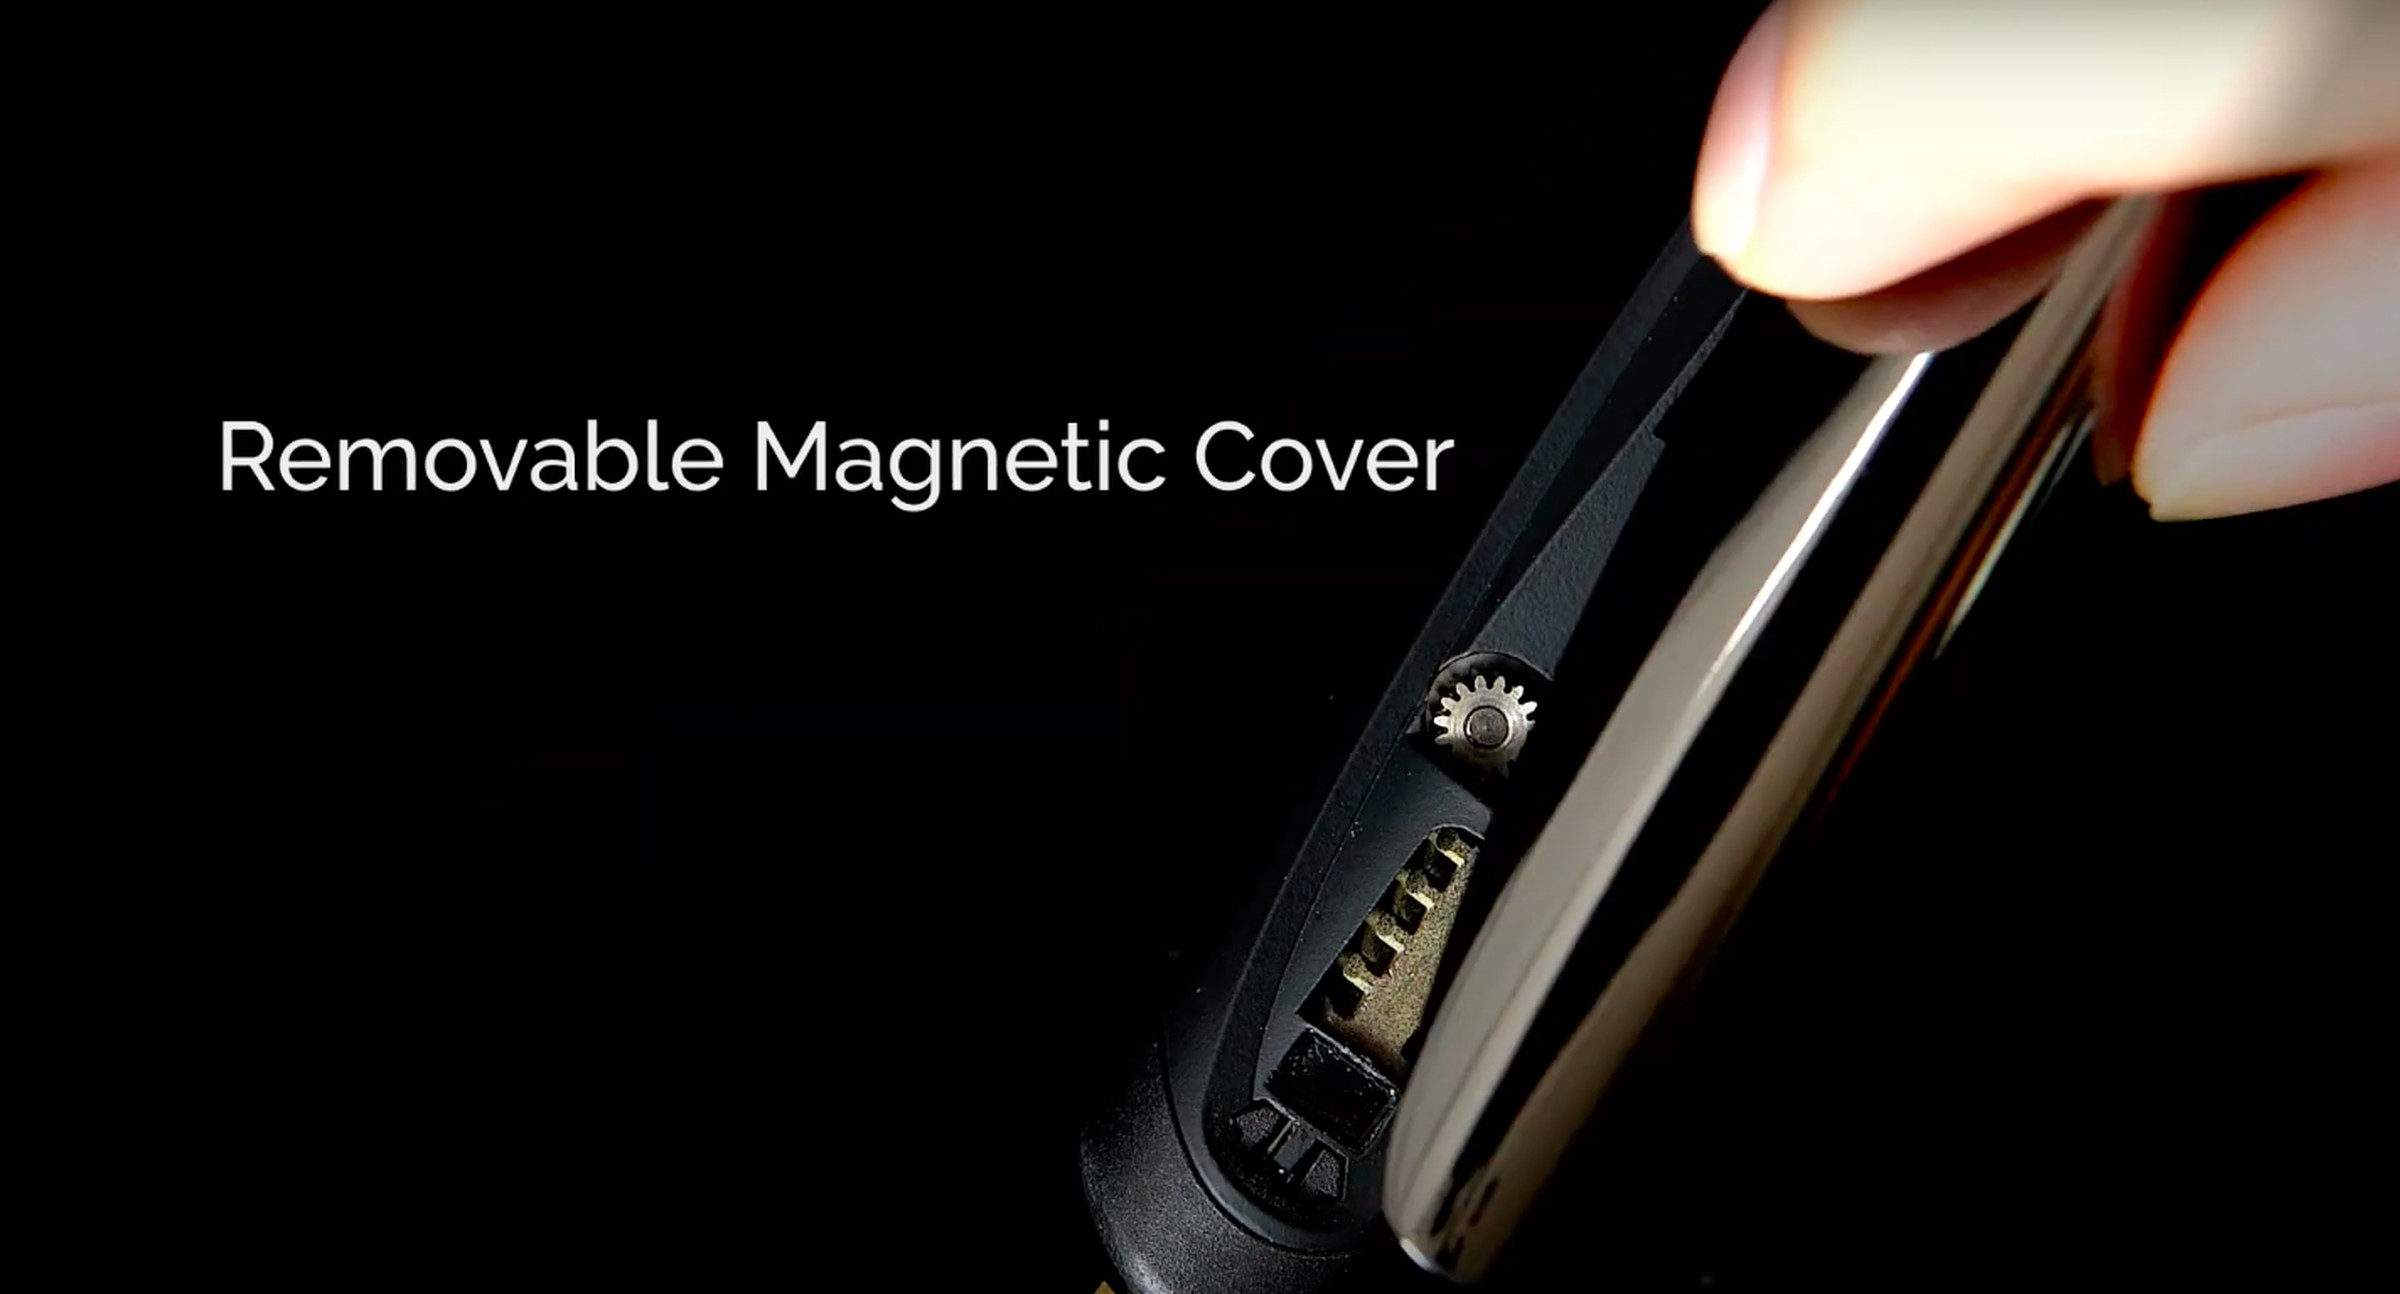 The removable magnetic back of the new Pro Plus.